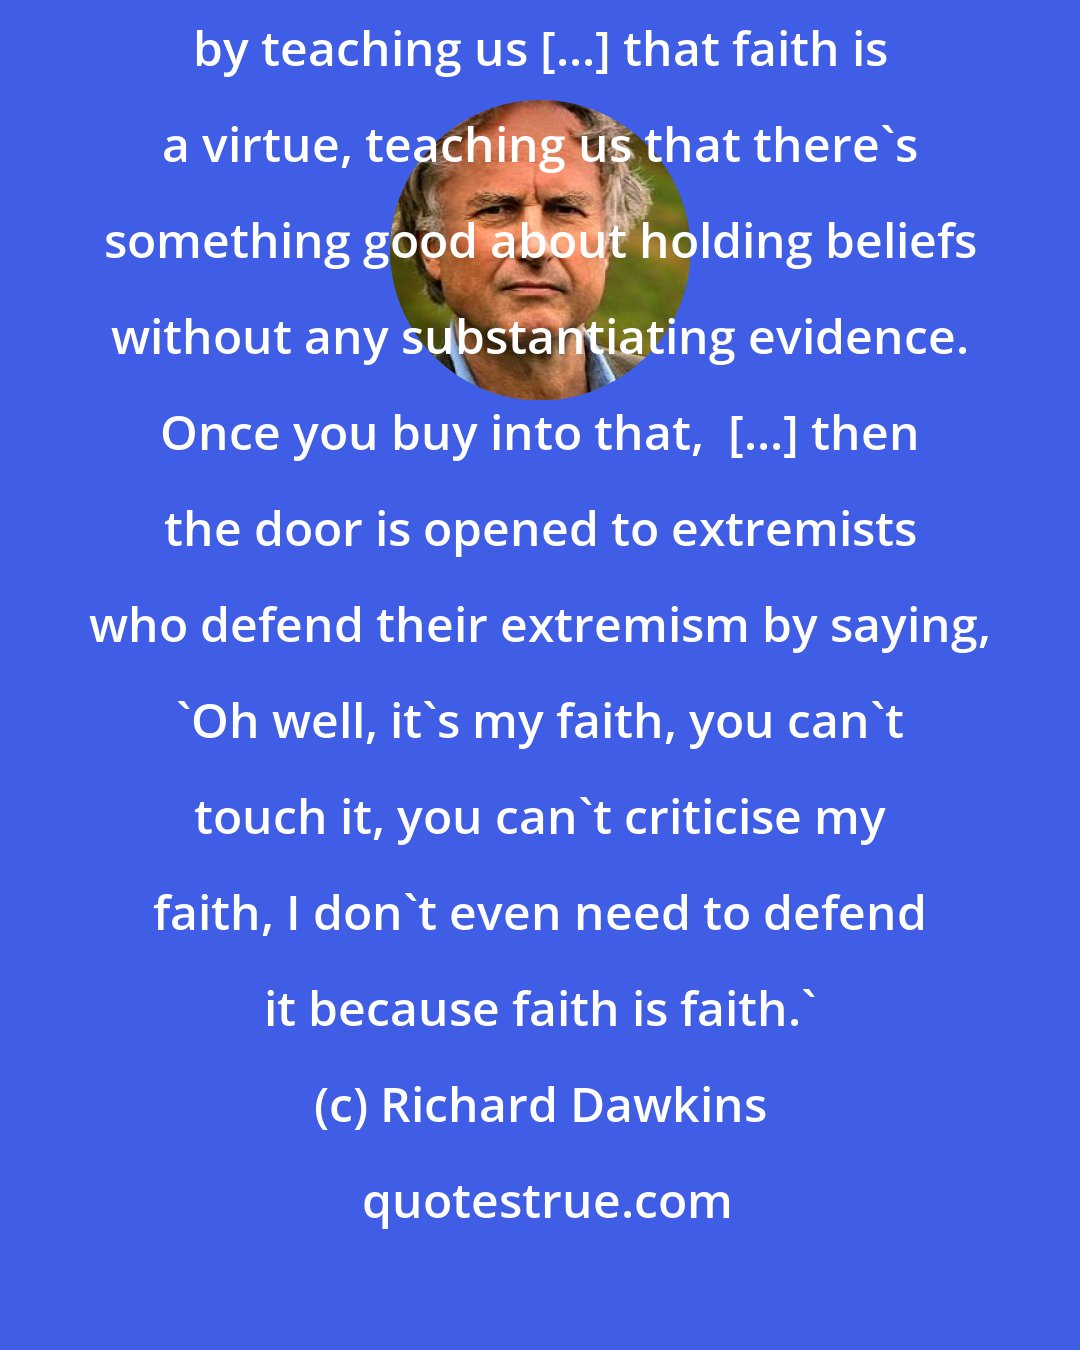 Richard Dawkins: I do believe that nice religious people make the world safe for extremists by teaching us [...] that faith is a virtue, teaching us that there's something good about holding beliefs without any substantiating evidence. Once you buy into that,  [...] then the door is opened to extremists who defend their extremism by saying, 'Oh well, it's my faith, you can't touch it, you can't criticise my faith, I don't even need to defend it because faith is faith.'